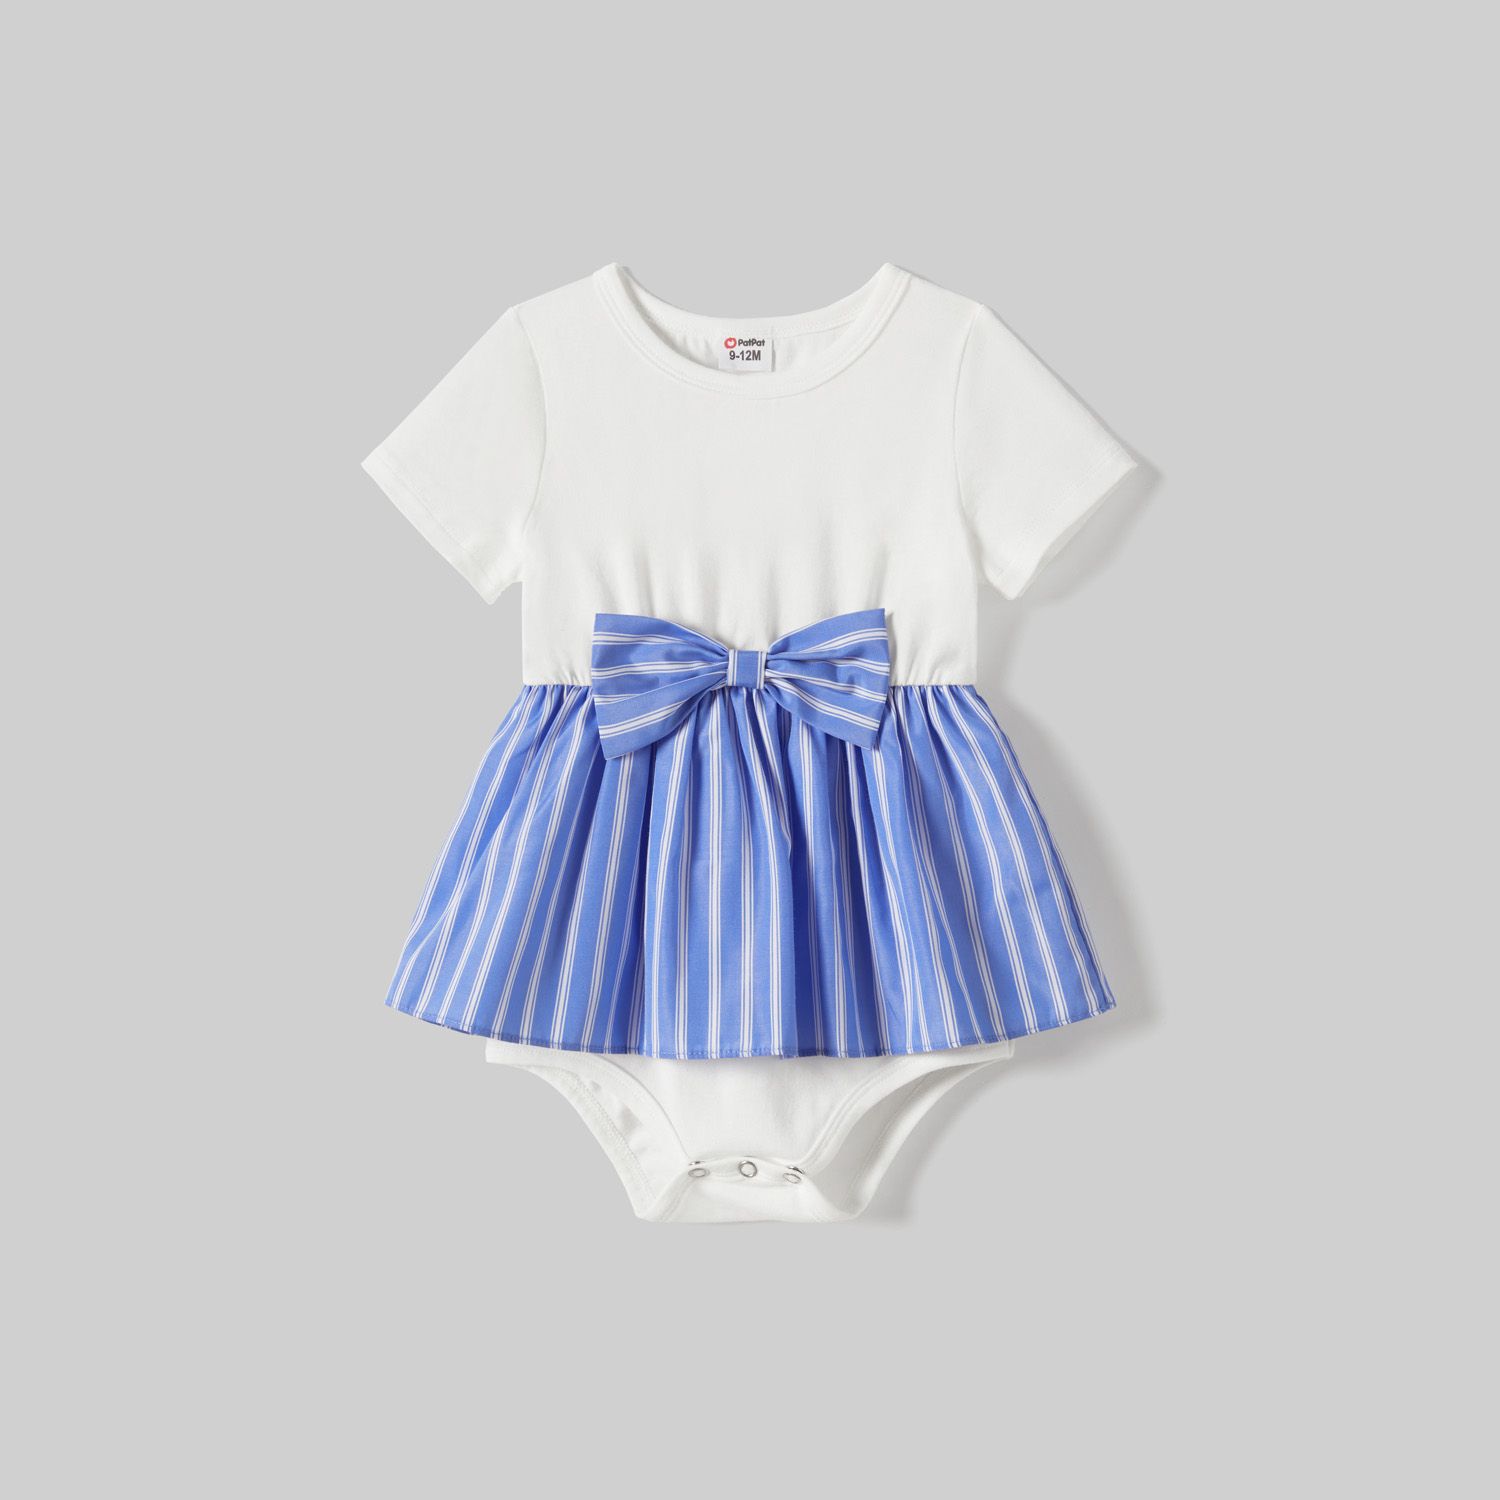 Family Matching Striped Button Belted High Low Hem Dresses And Striped Short Sleeve Tops Sets